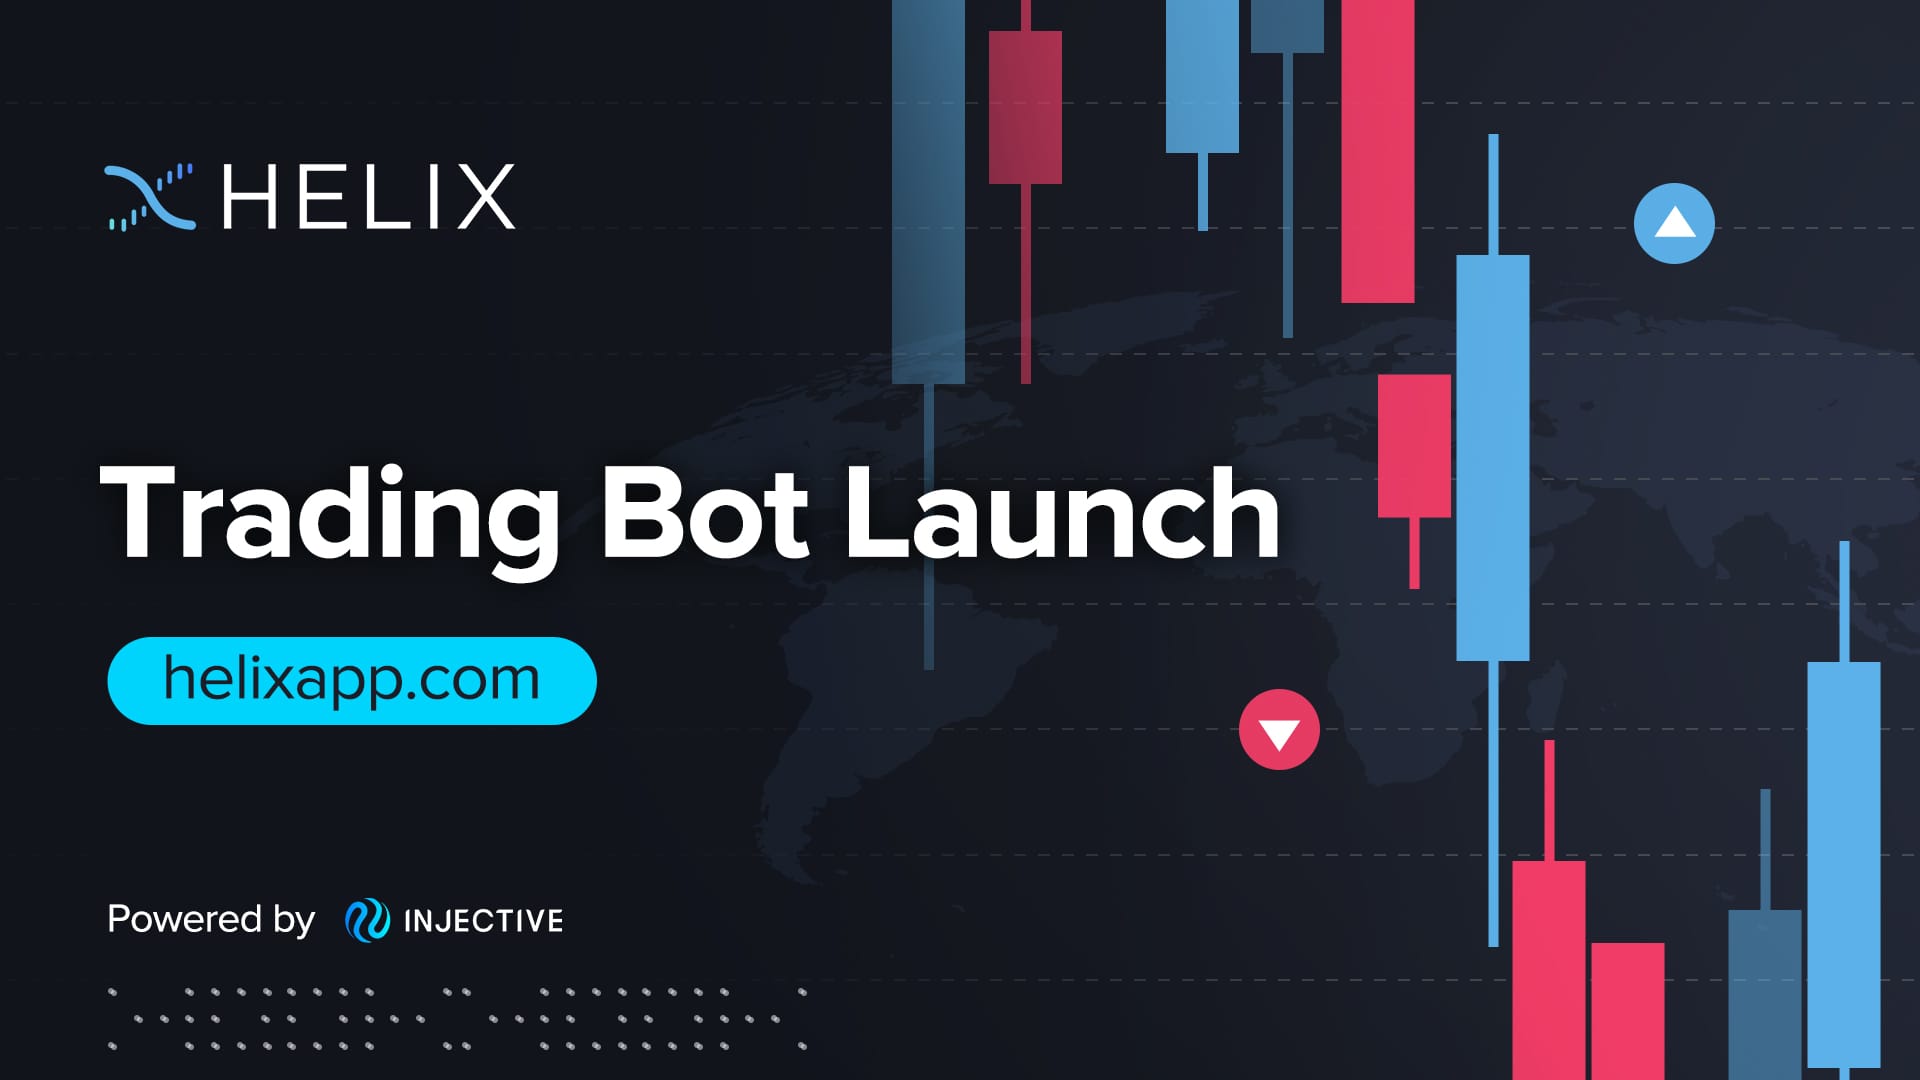 Helix Trading Bot Launch